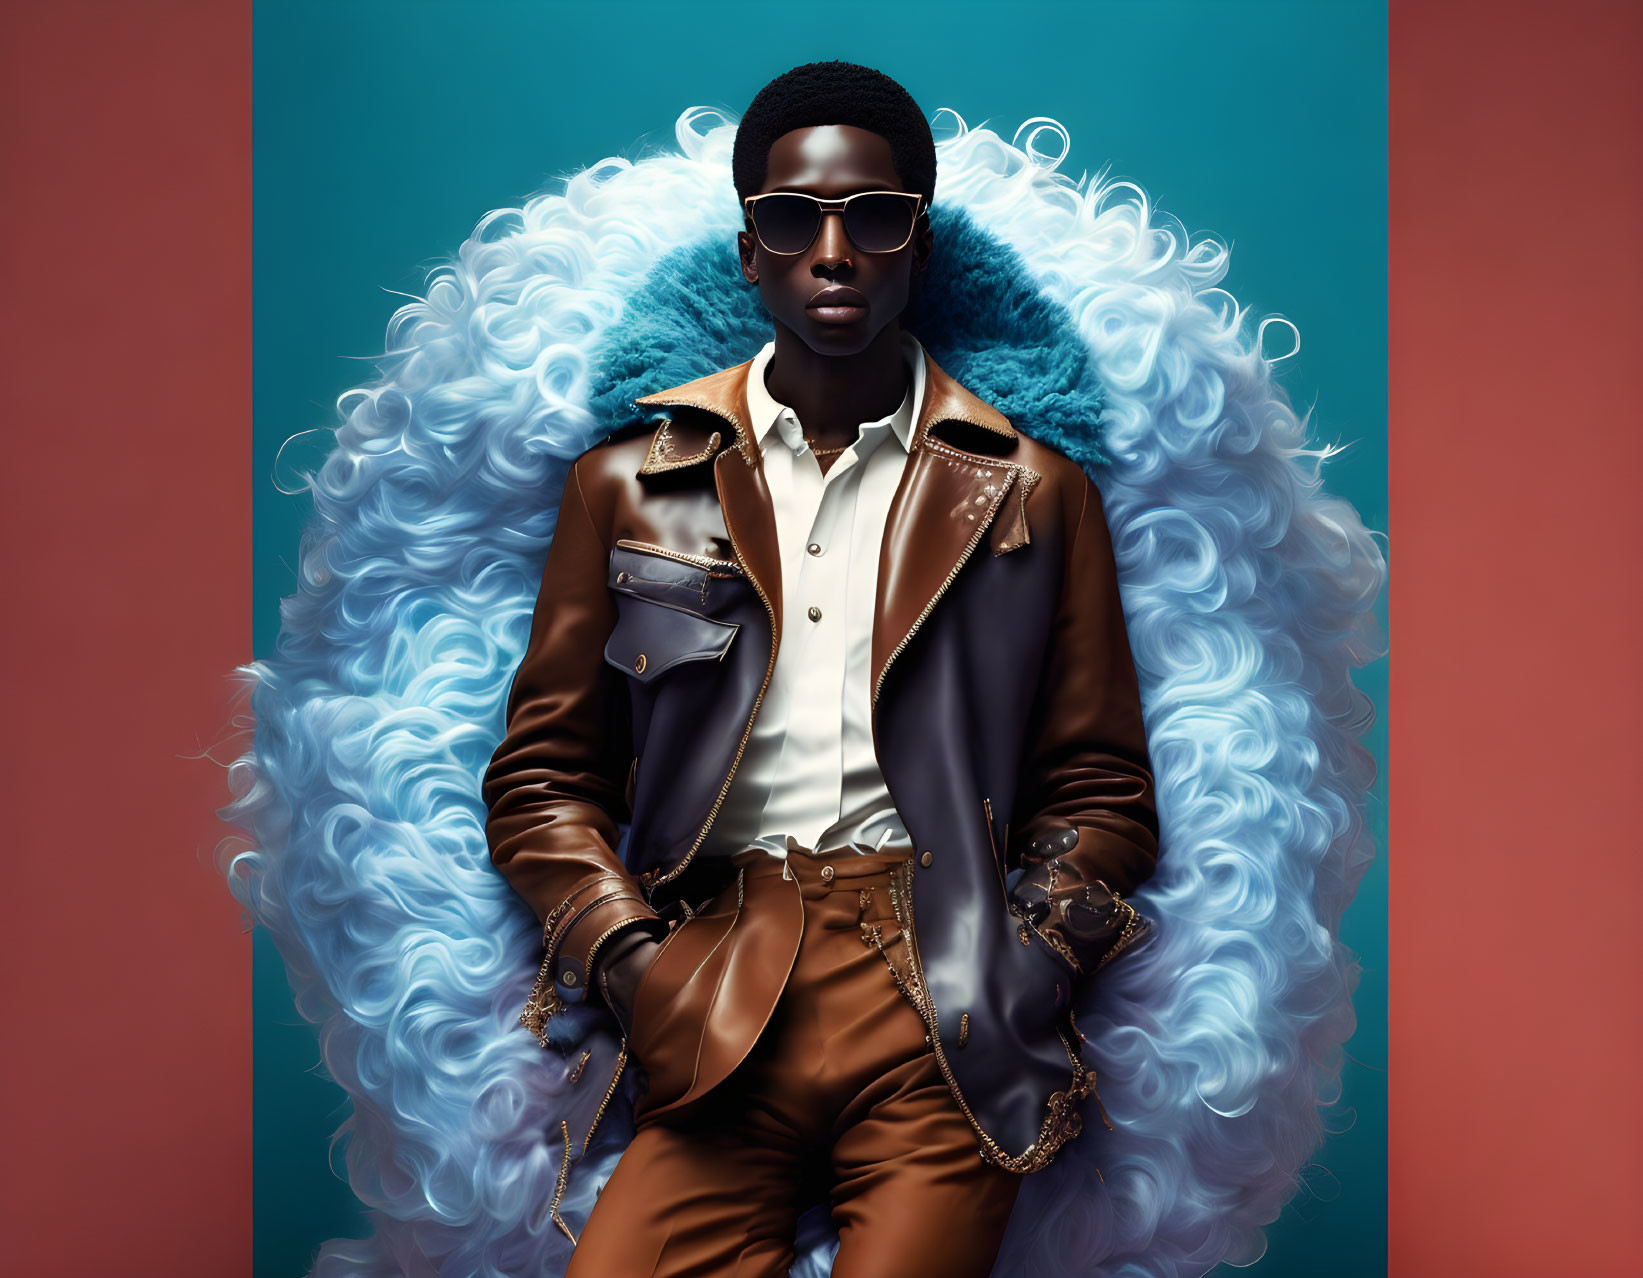 Fashionable individual in sunglasses and leather jacket against teal background